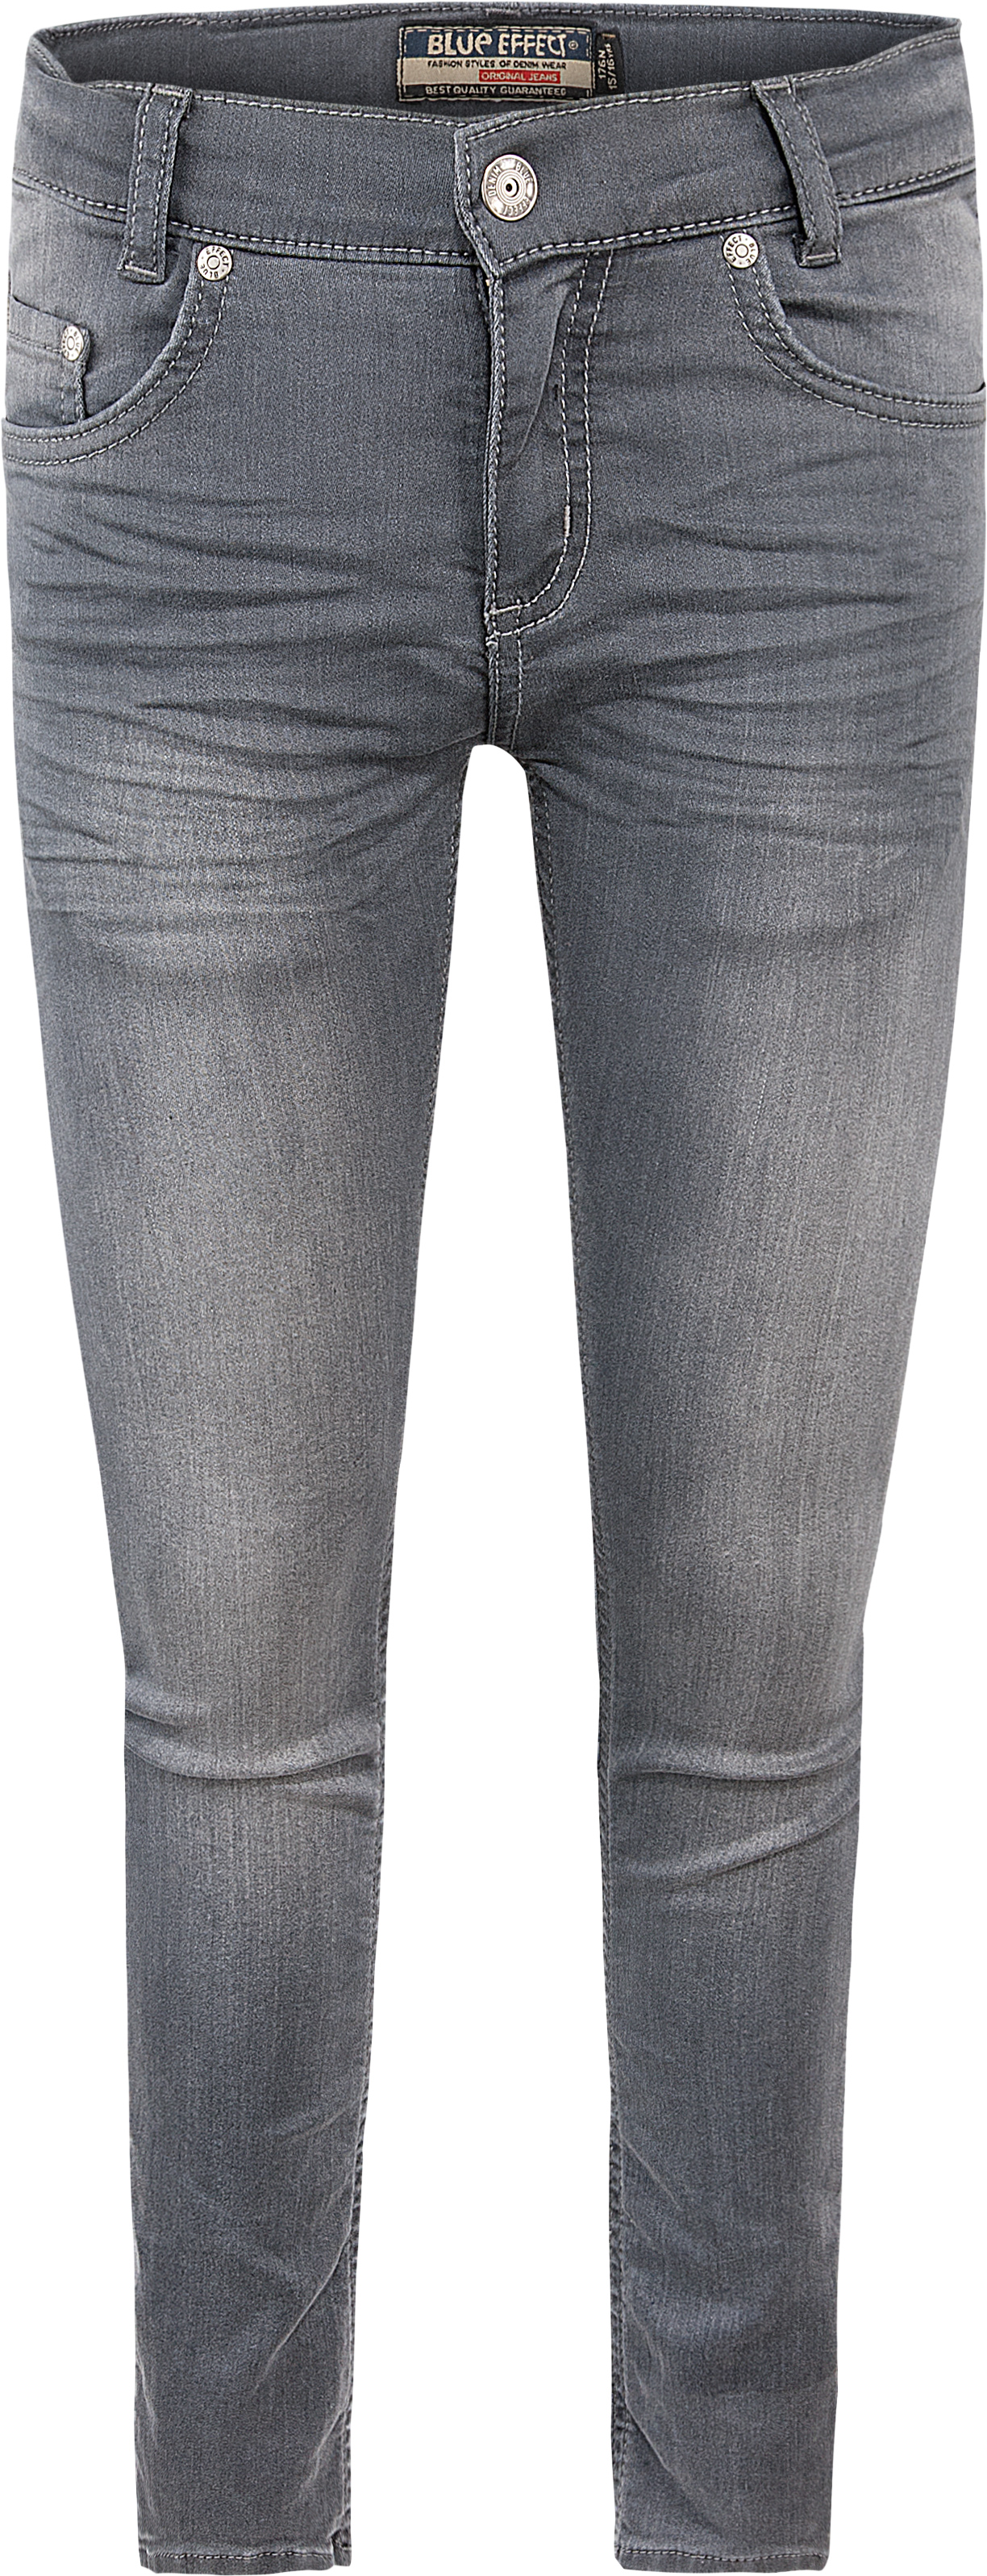 0231-NOS Boys Jeans Special Skinny, Ultrastretch, available in Slim,Normal,Wide